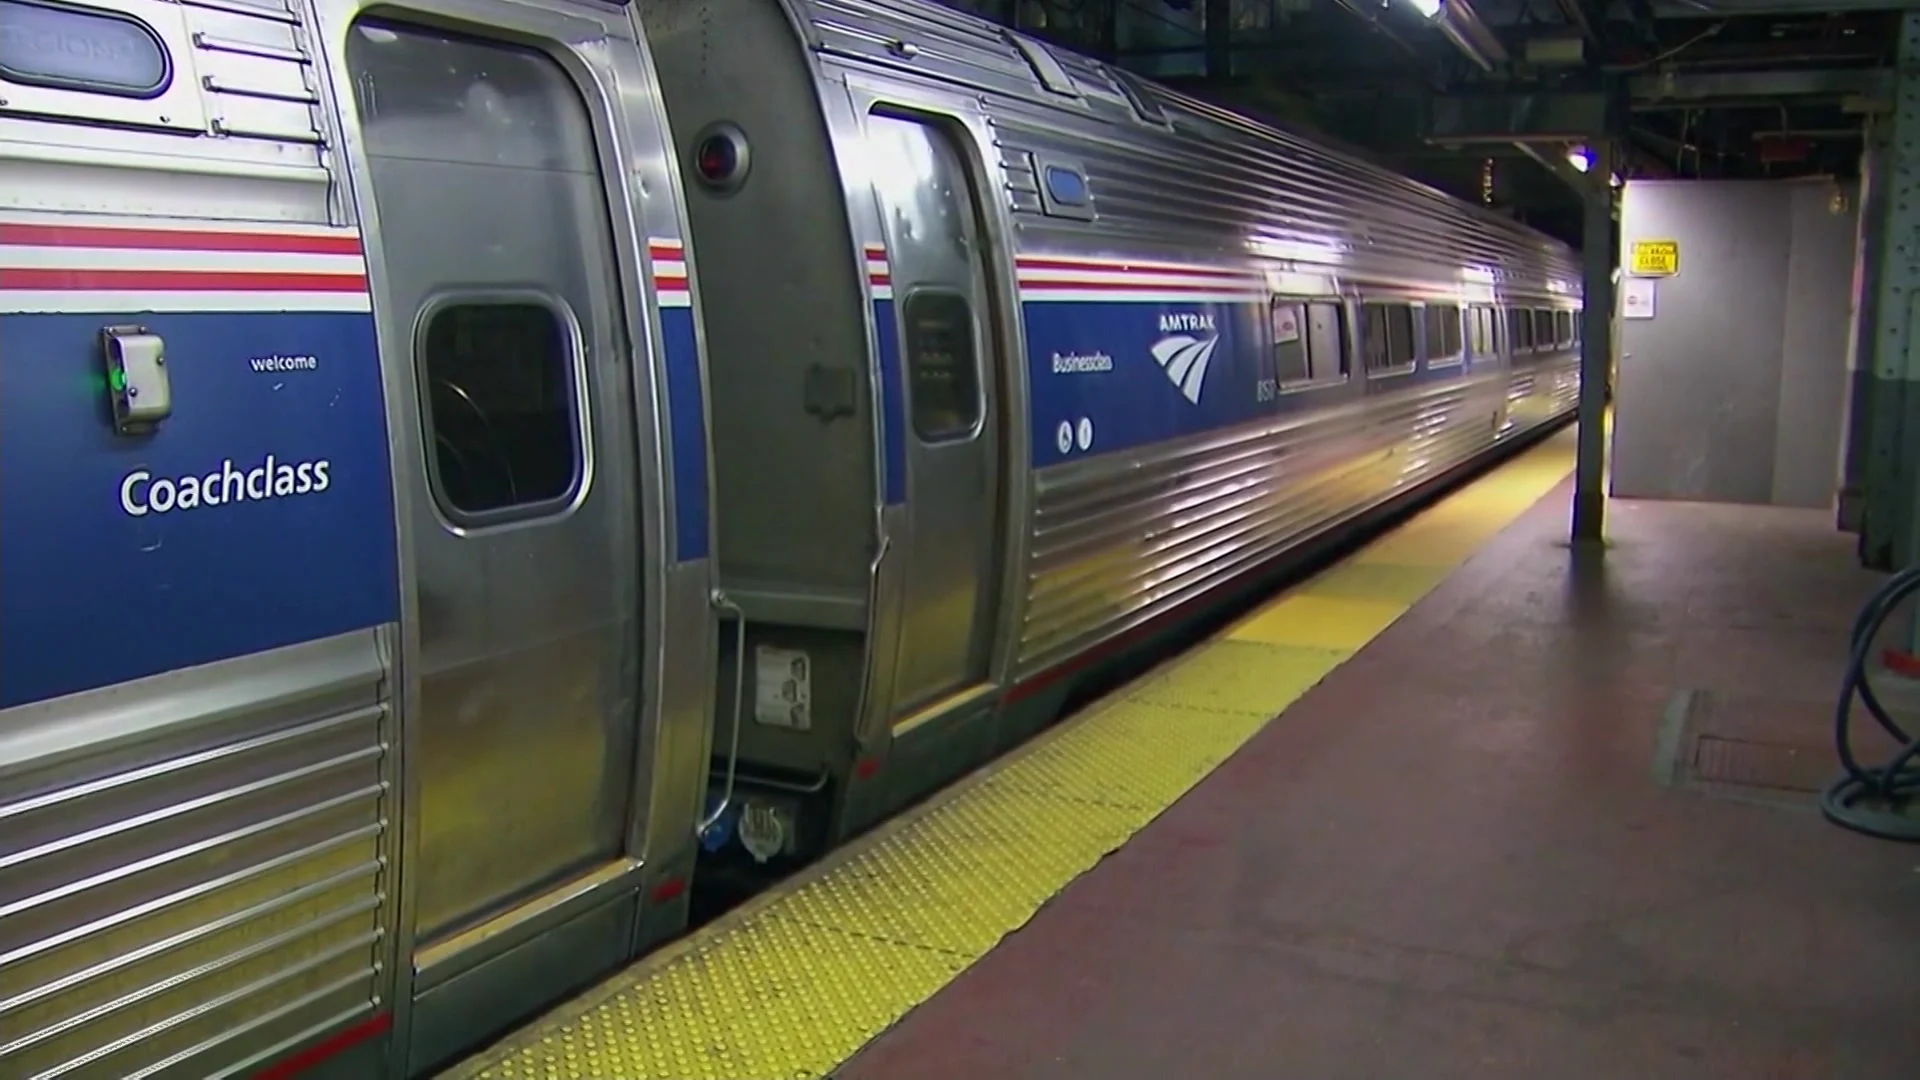 ‘Highway robbery at its finest.’ Commuters frustrated with NJ Transit, Amtrak issues as train delays pile up